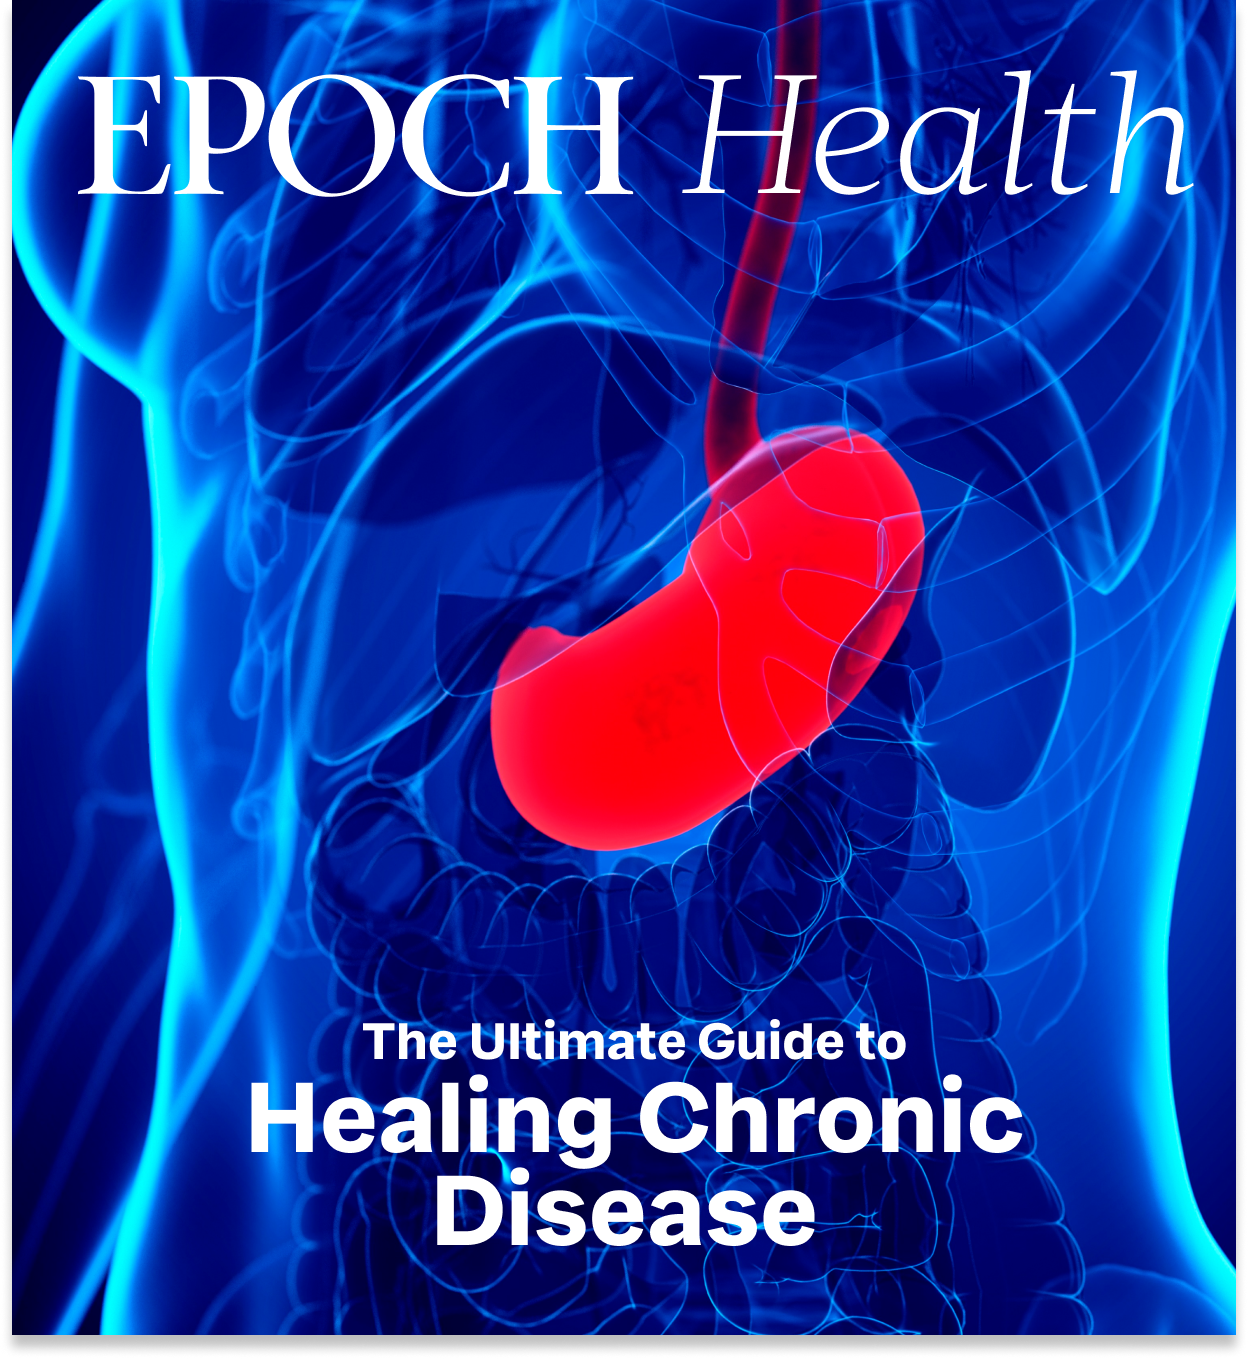 The Ultimate Guide to Healing Chronic Diseases